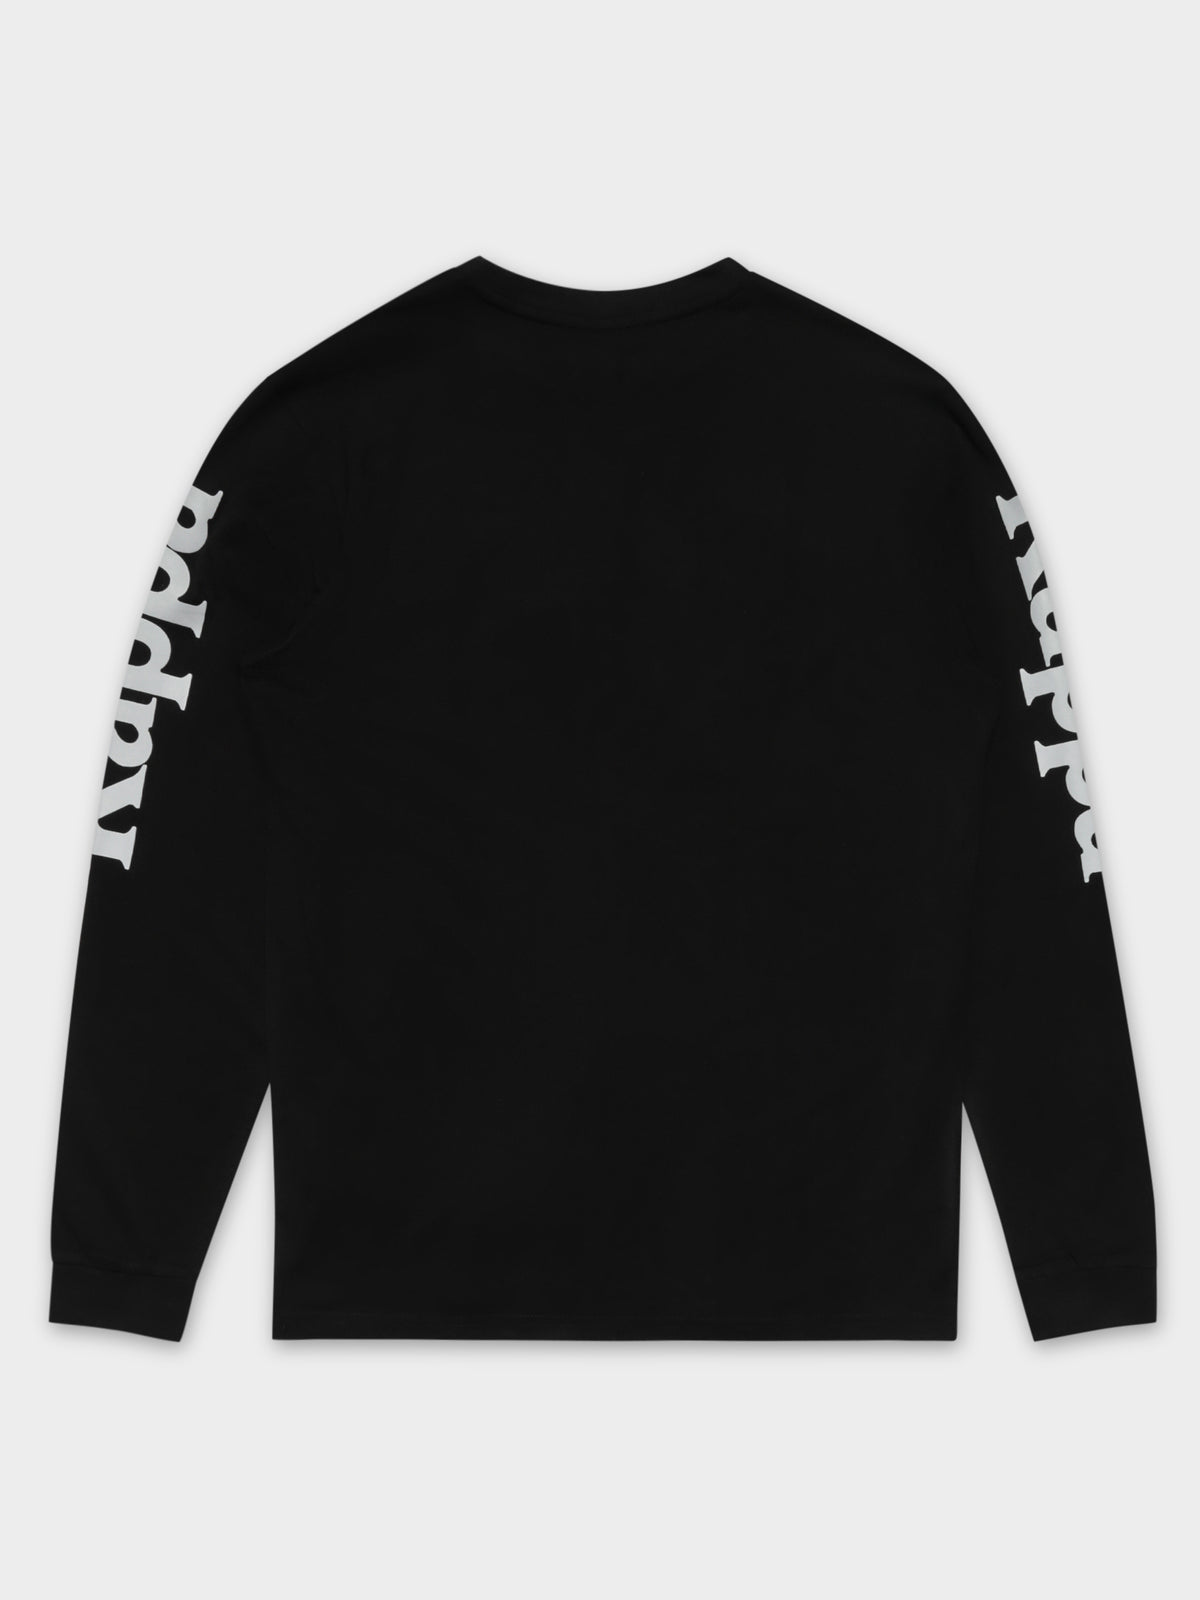 Authentic Defer 2 Man Long Sleeve T-Shirt in Black